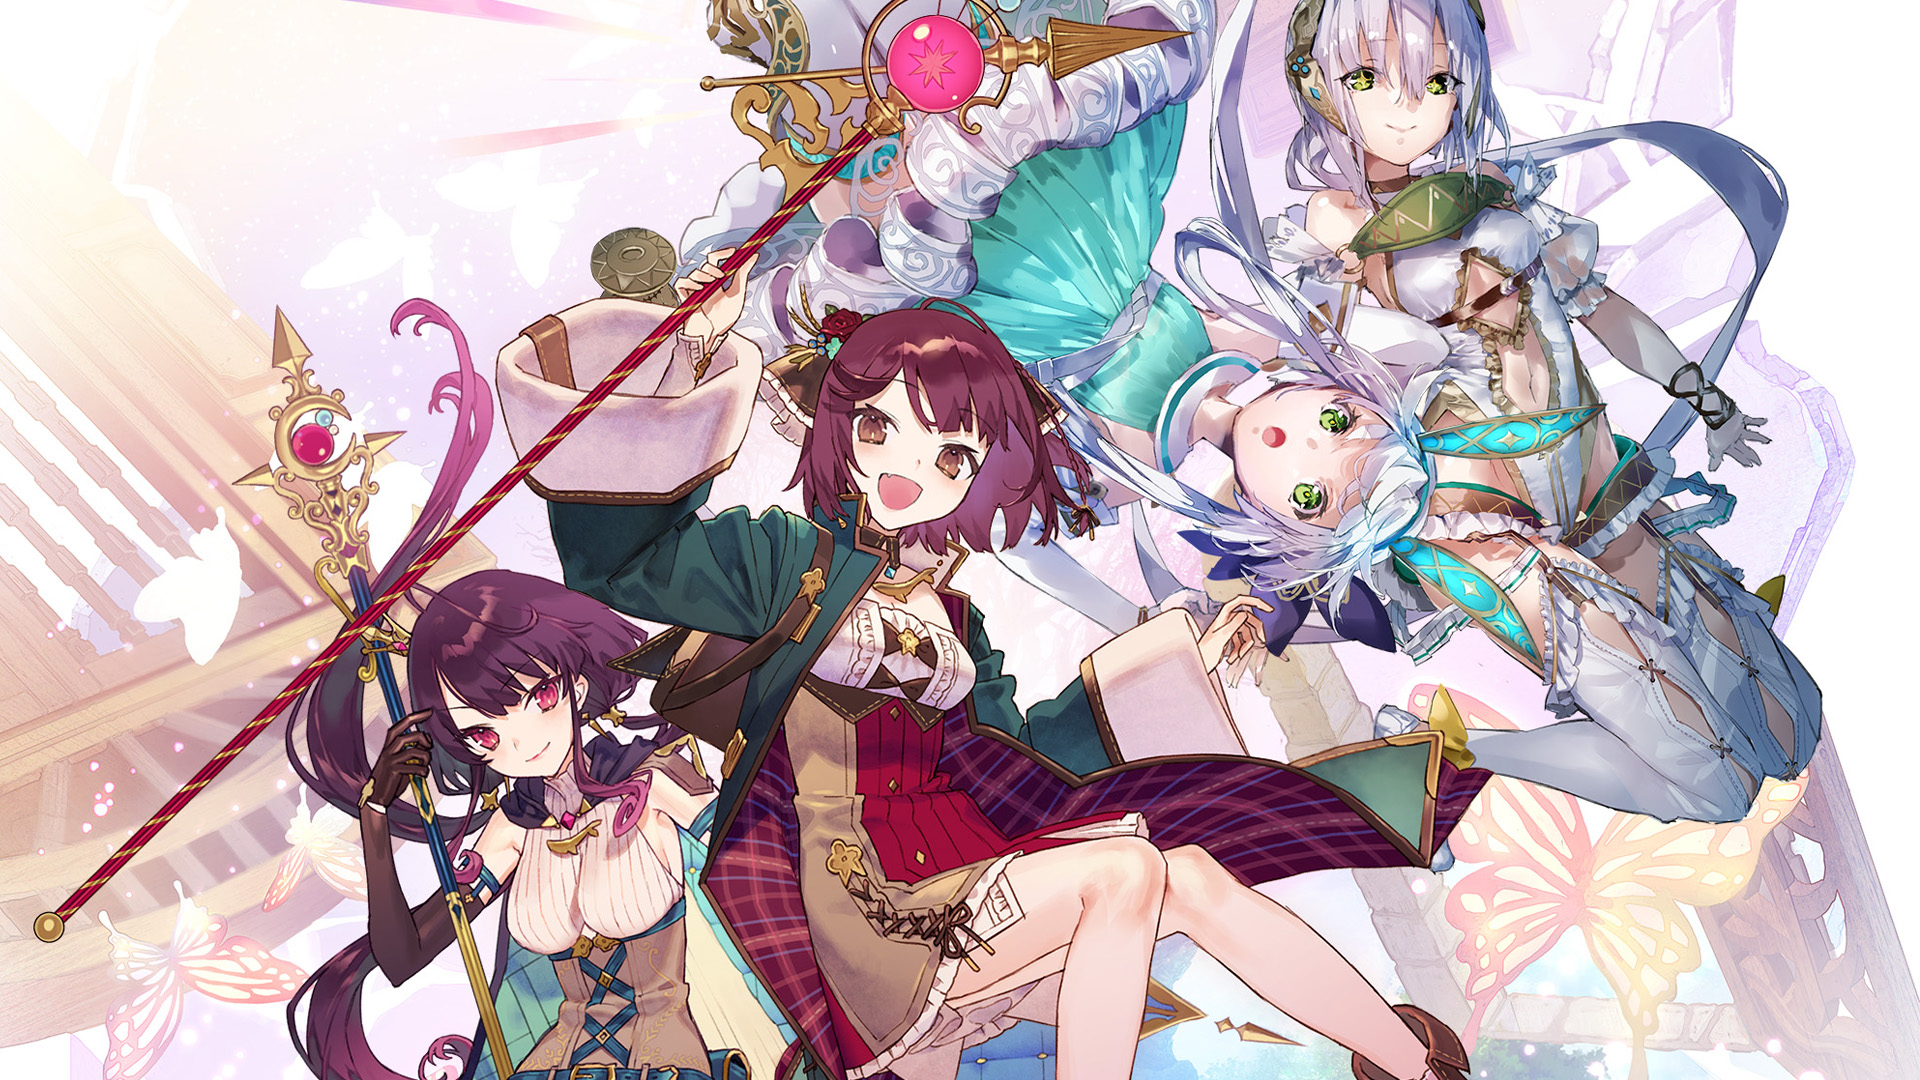 Atelier Sophie 2: The Alchemist of the Mysterious Dawn